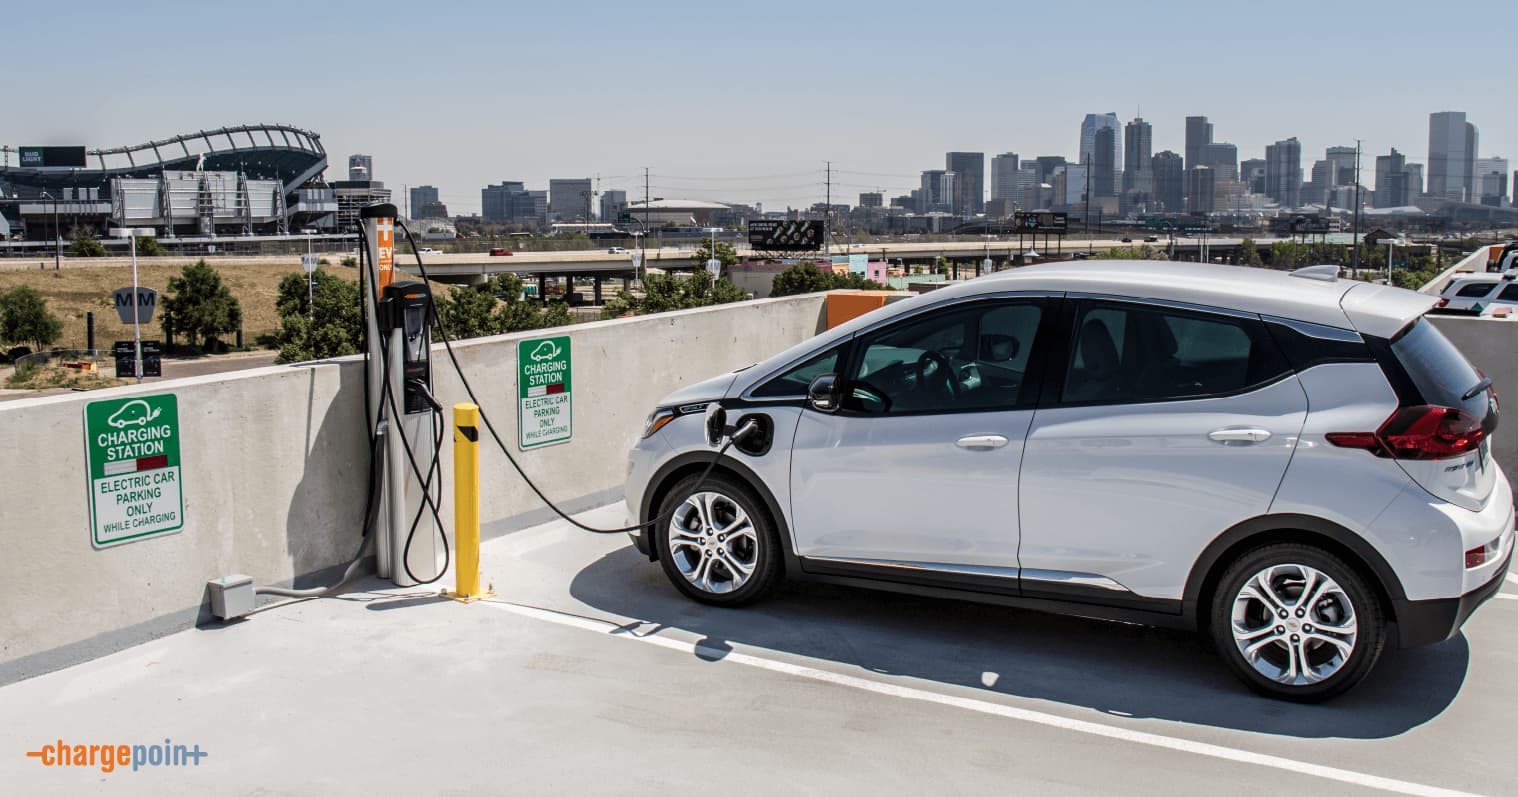 These electric-vehicle charging stocks are surging on the infrastructure bill